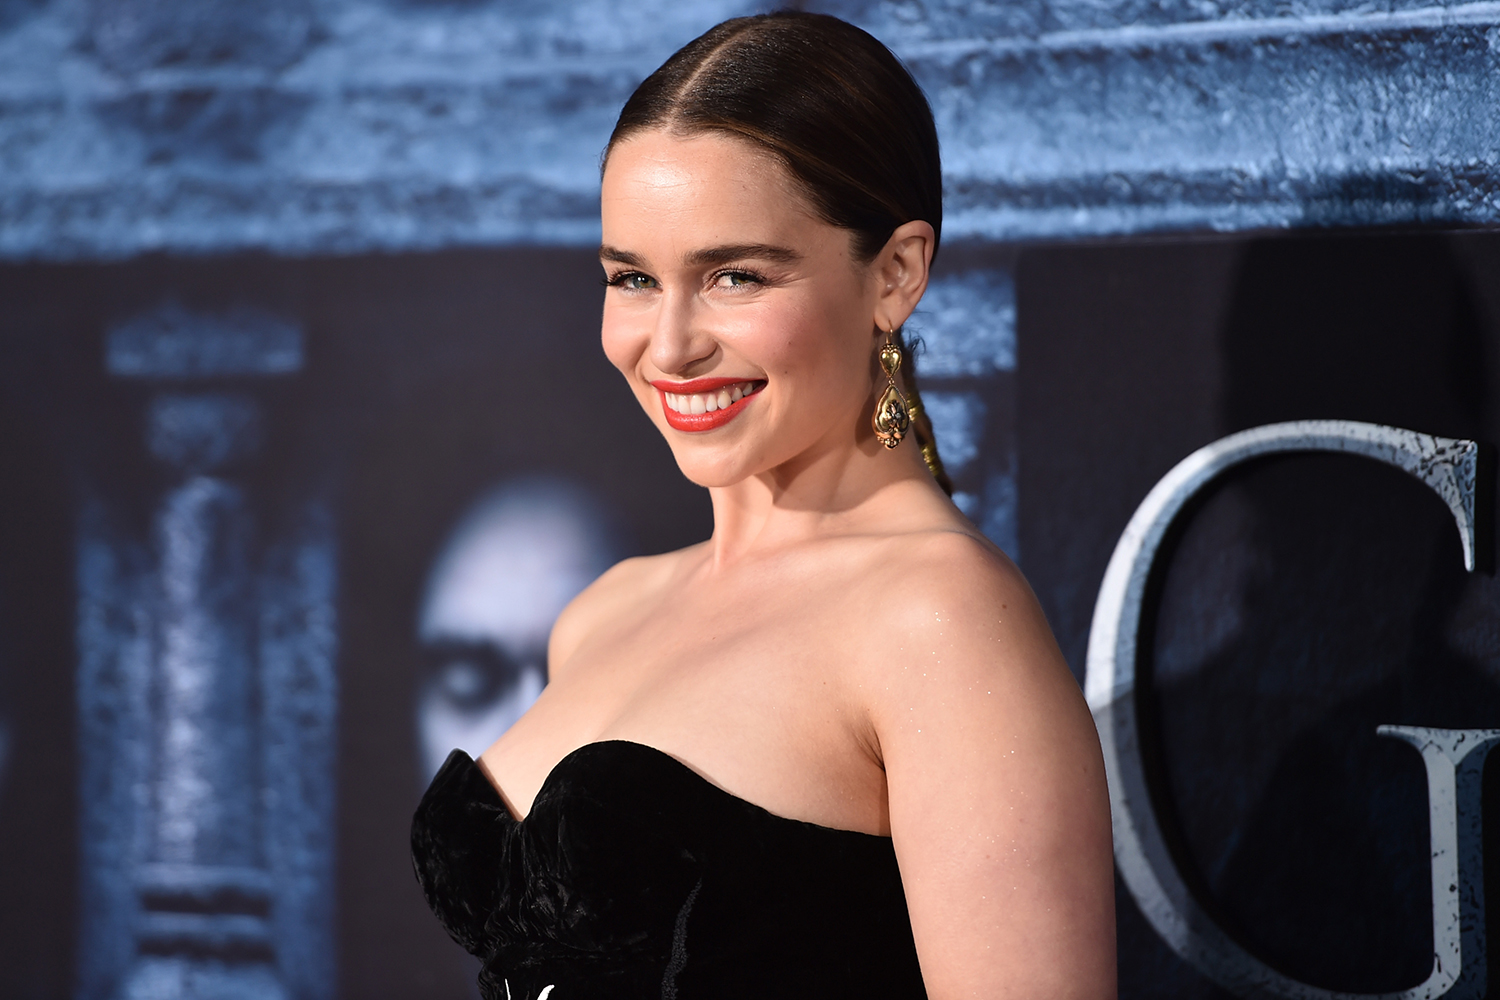 Emilia Clarke Has Responded To The Critisism Of The ‘Game Of Thrones’ Finale